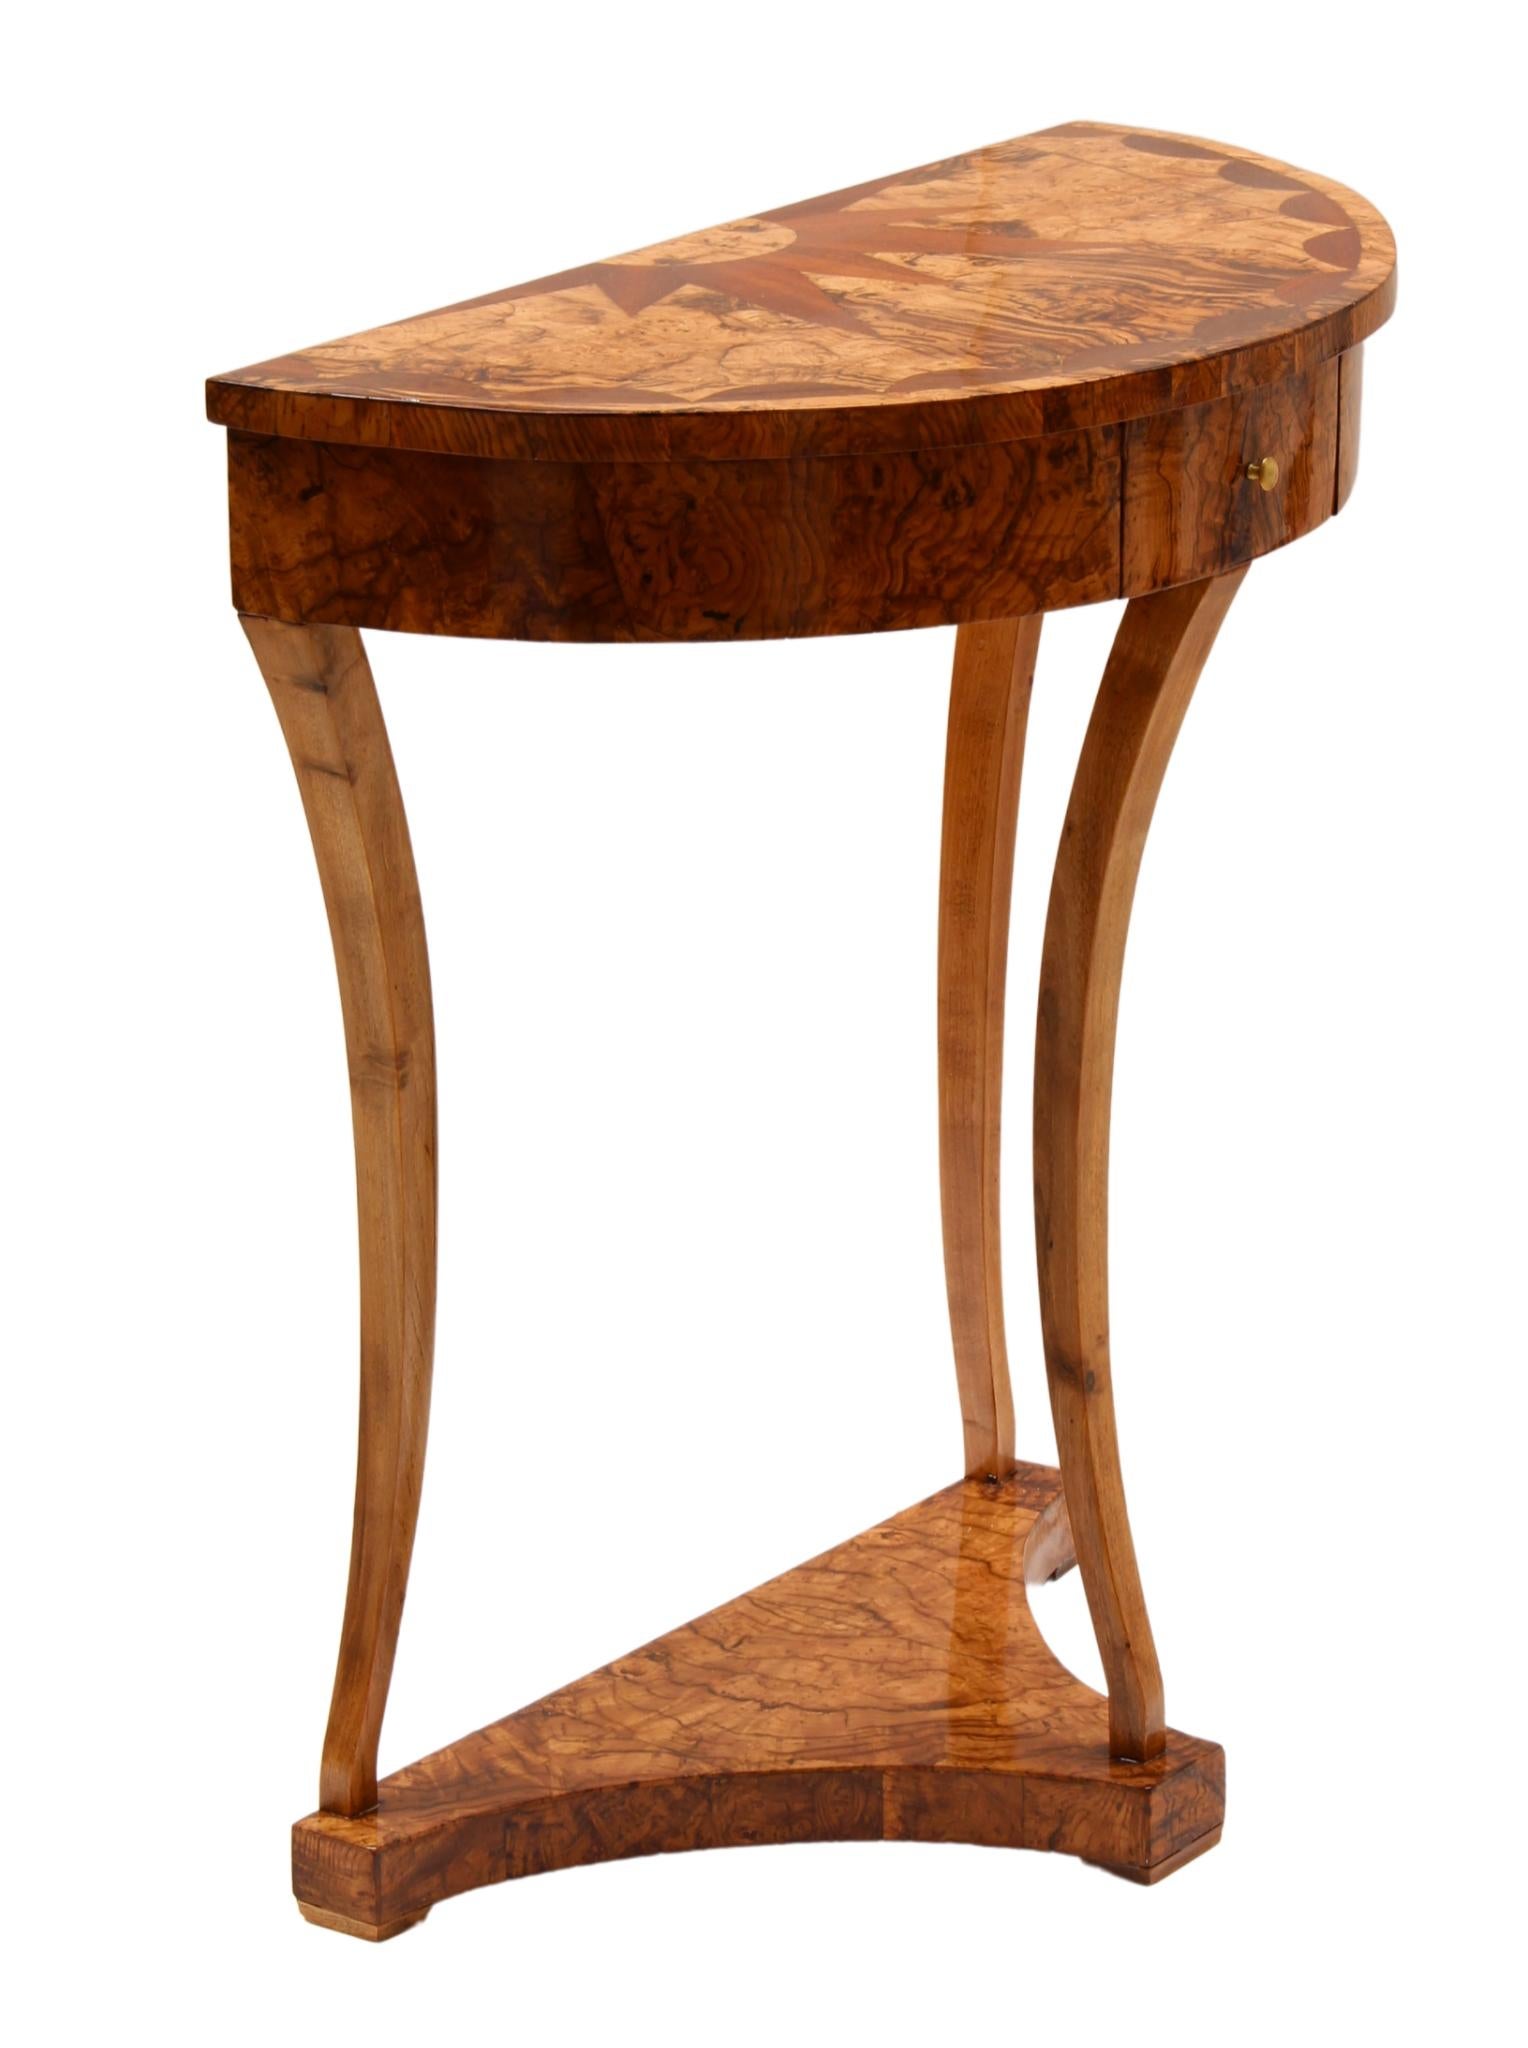 The Demi Lune console dates from the Biedermeier period around 1820 and has beautiful veneer marquetry on the top. The veneer is made of ash wood / ash root wood and the legs are made of solid walnut. The console has a wonderful Biedermeier design